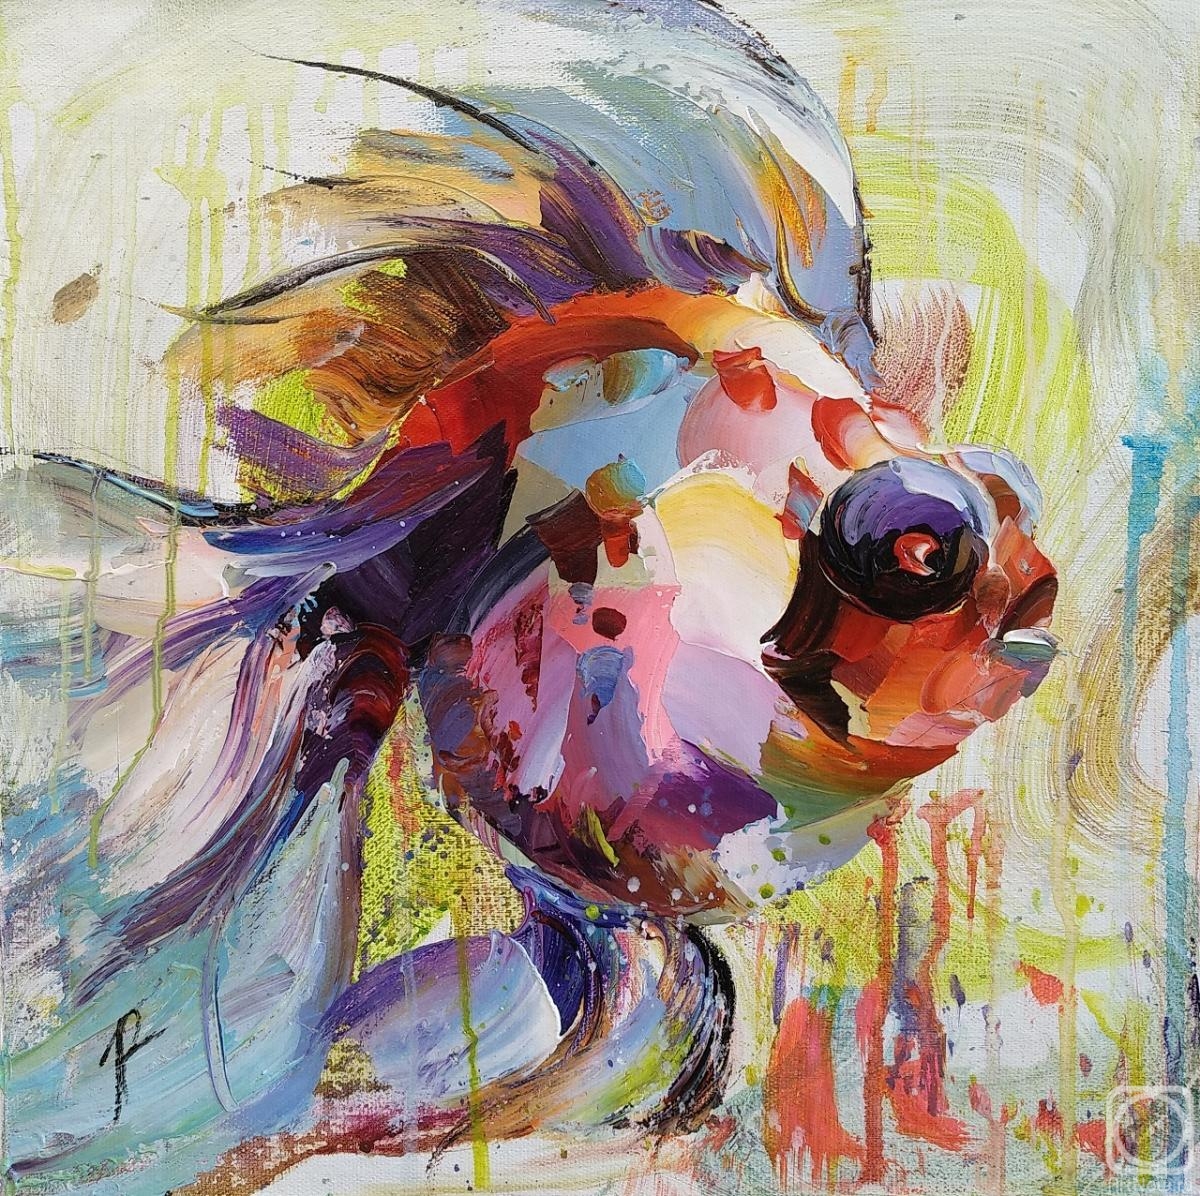 Rodries Jose. Goldfish for the fulfillment of desires. N7